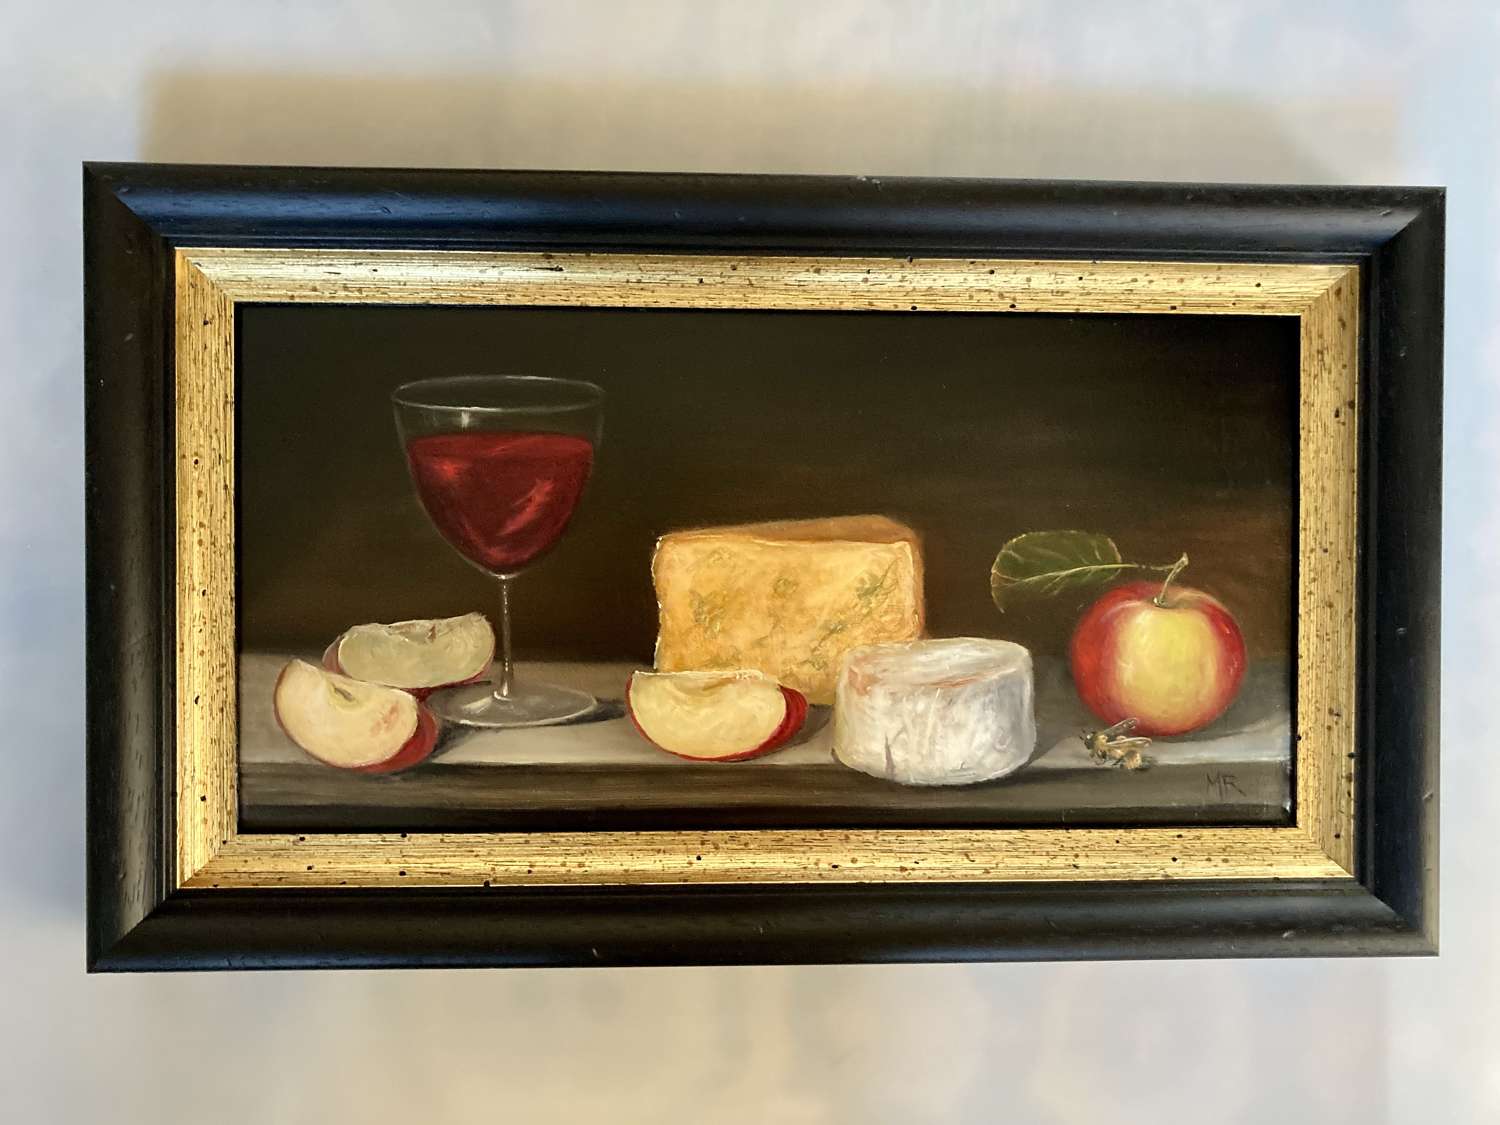 Cheese, wine, apples and a bee.